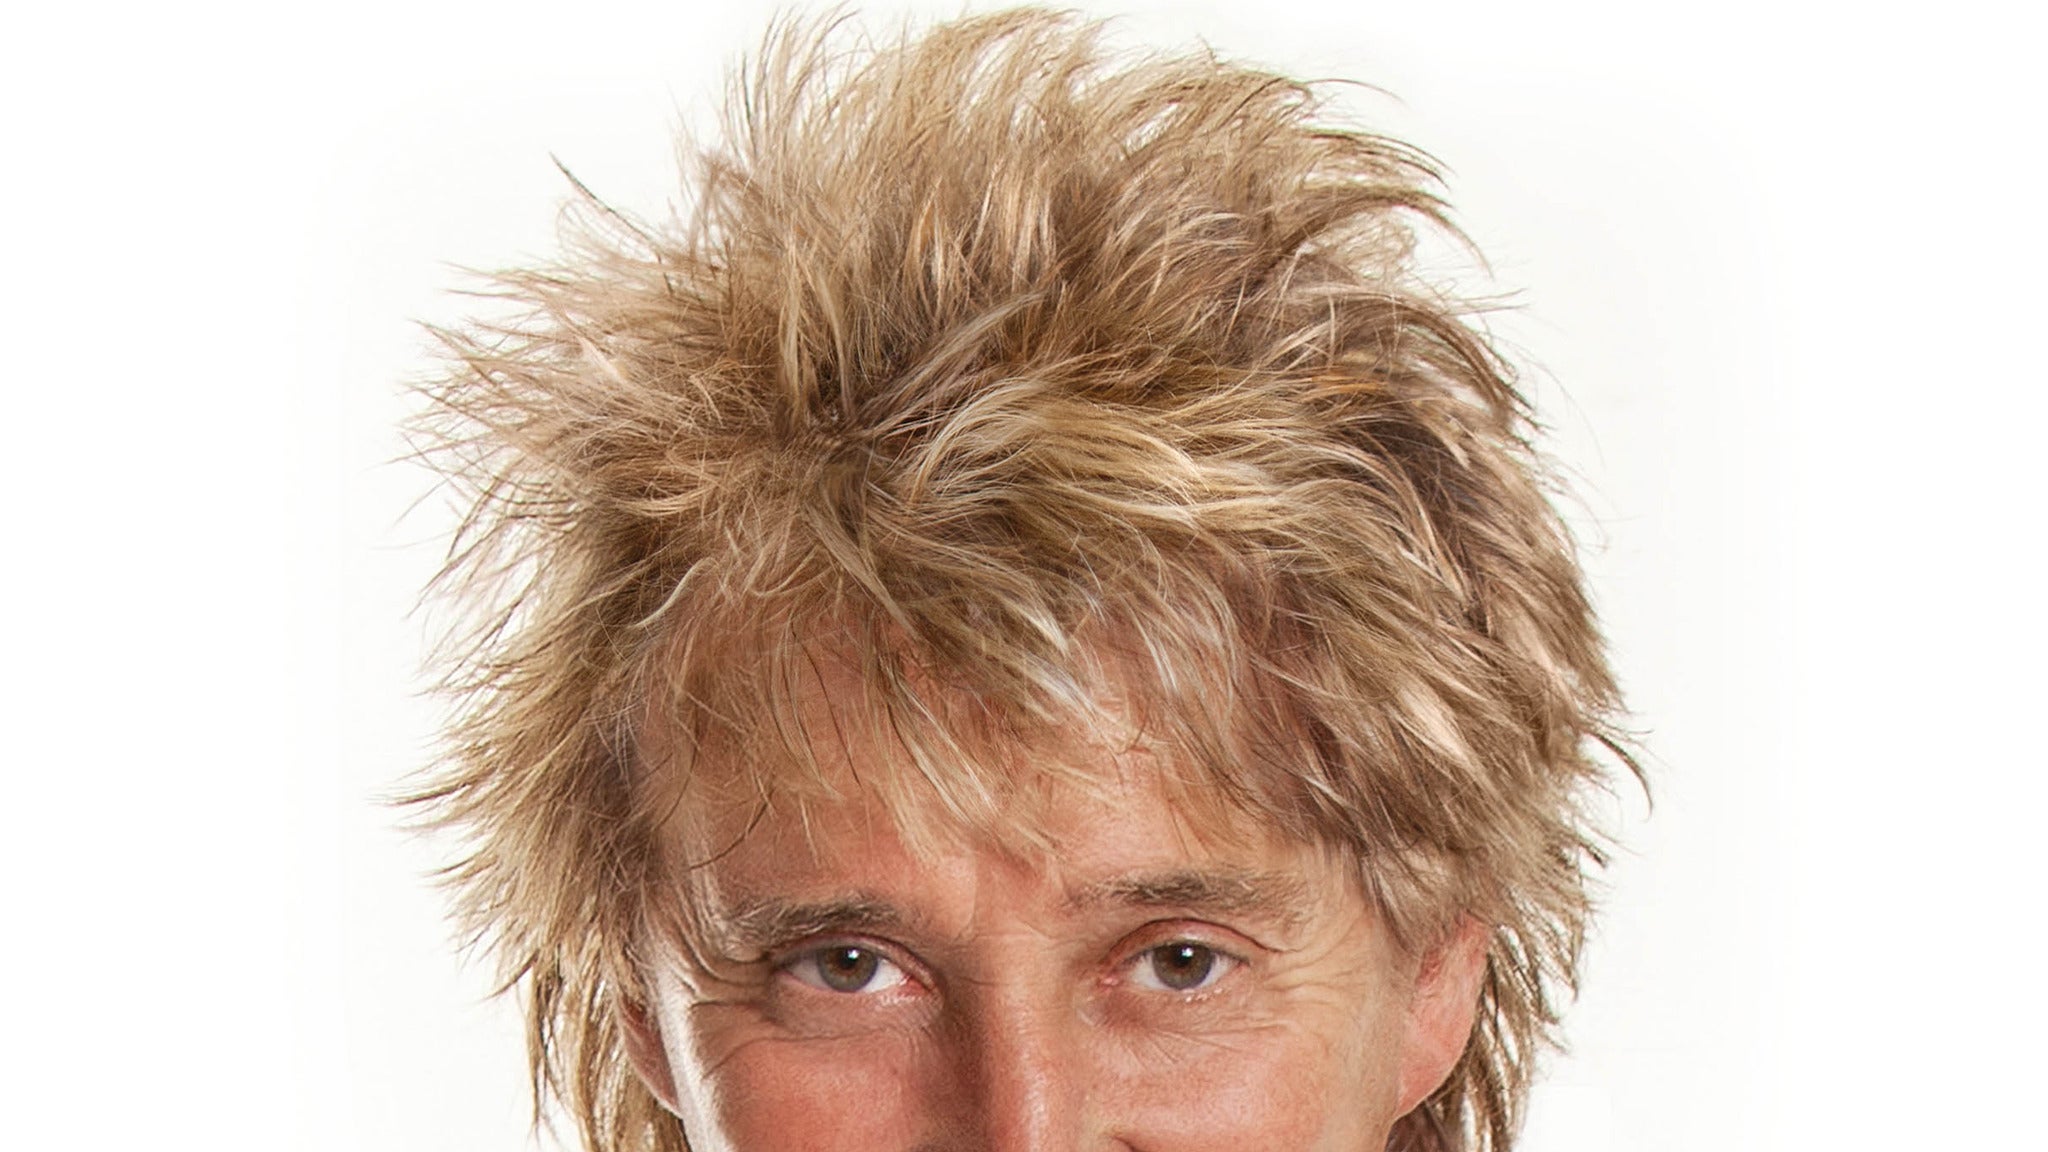 Rod Stewart presale password for real tickets in Hollywood